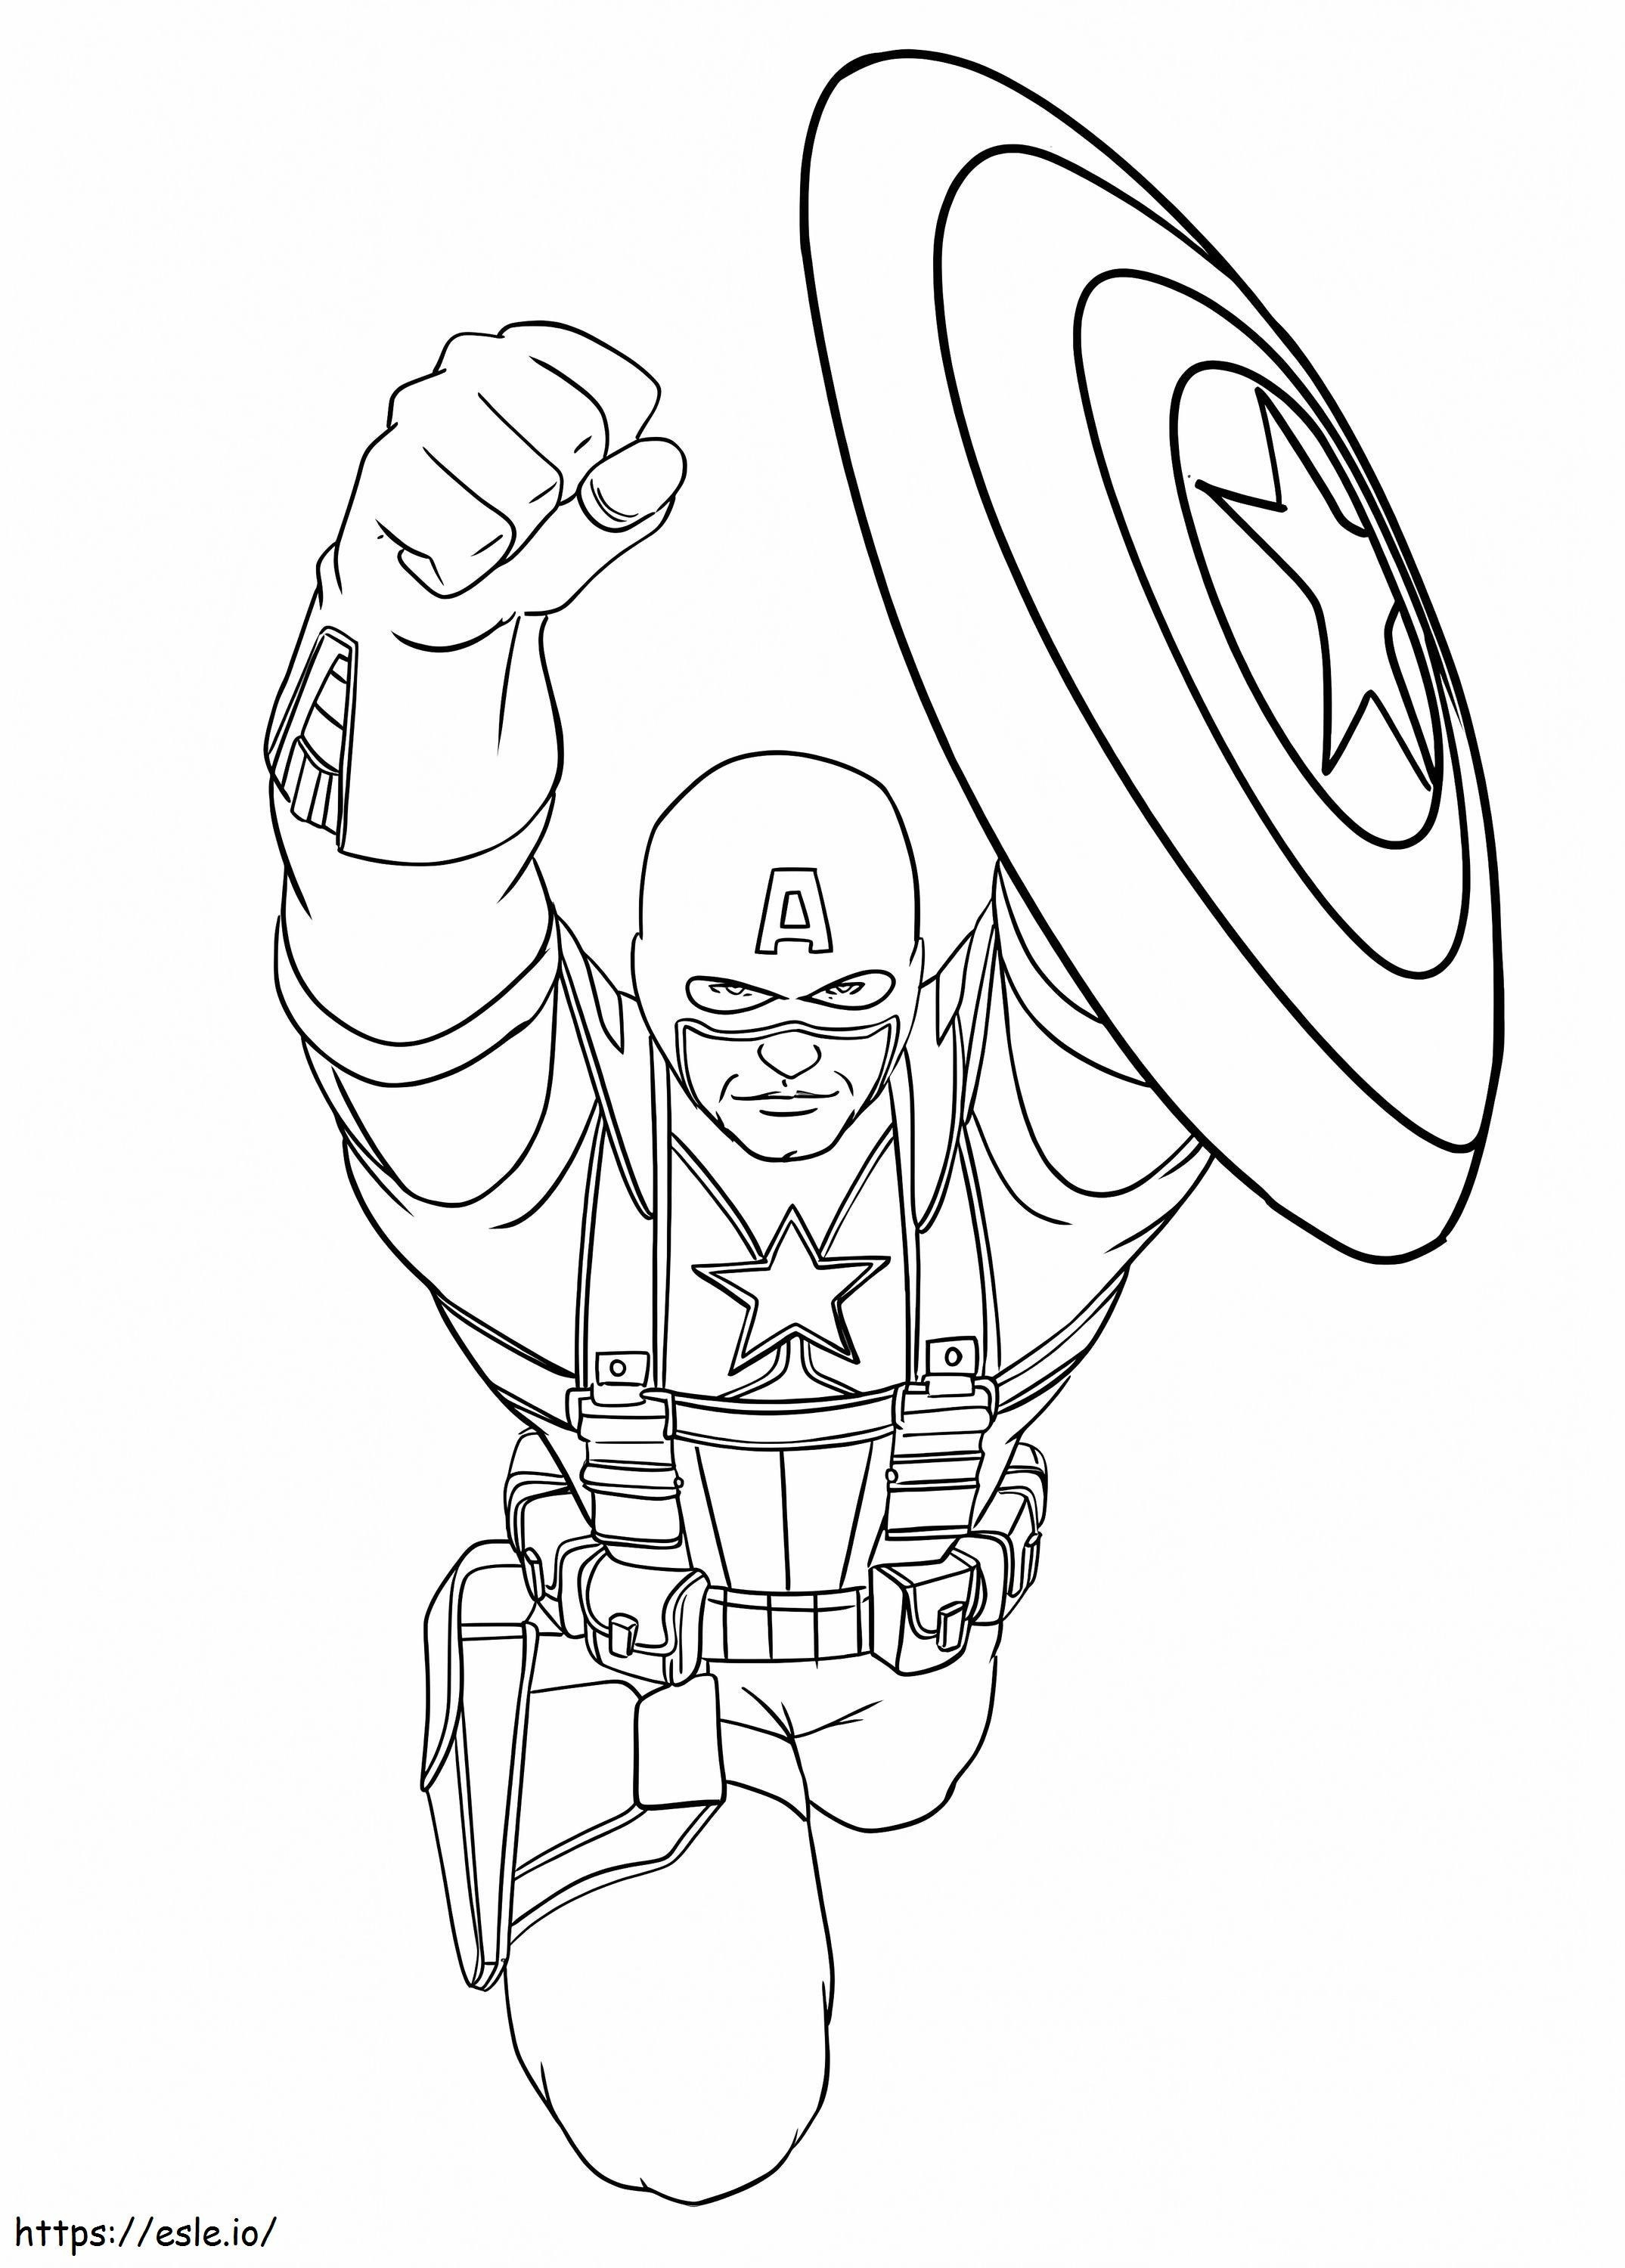 Jump Captain America coloring page